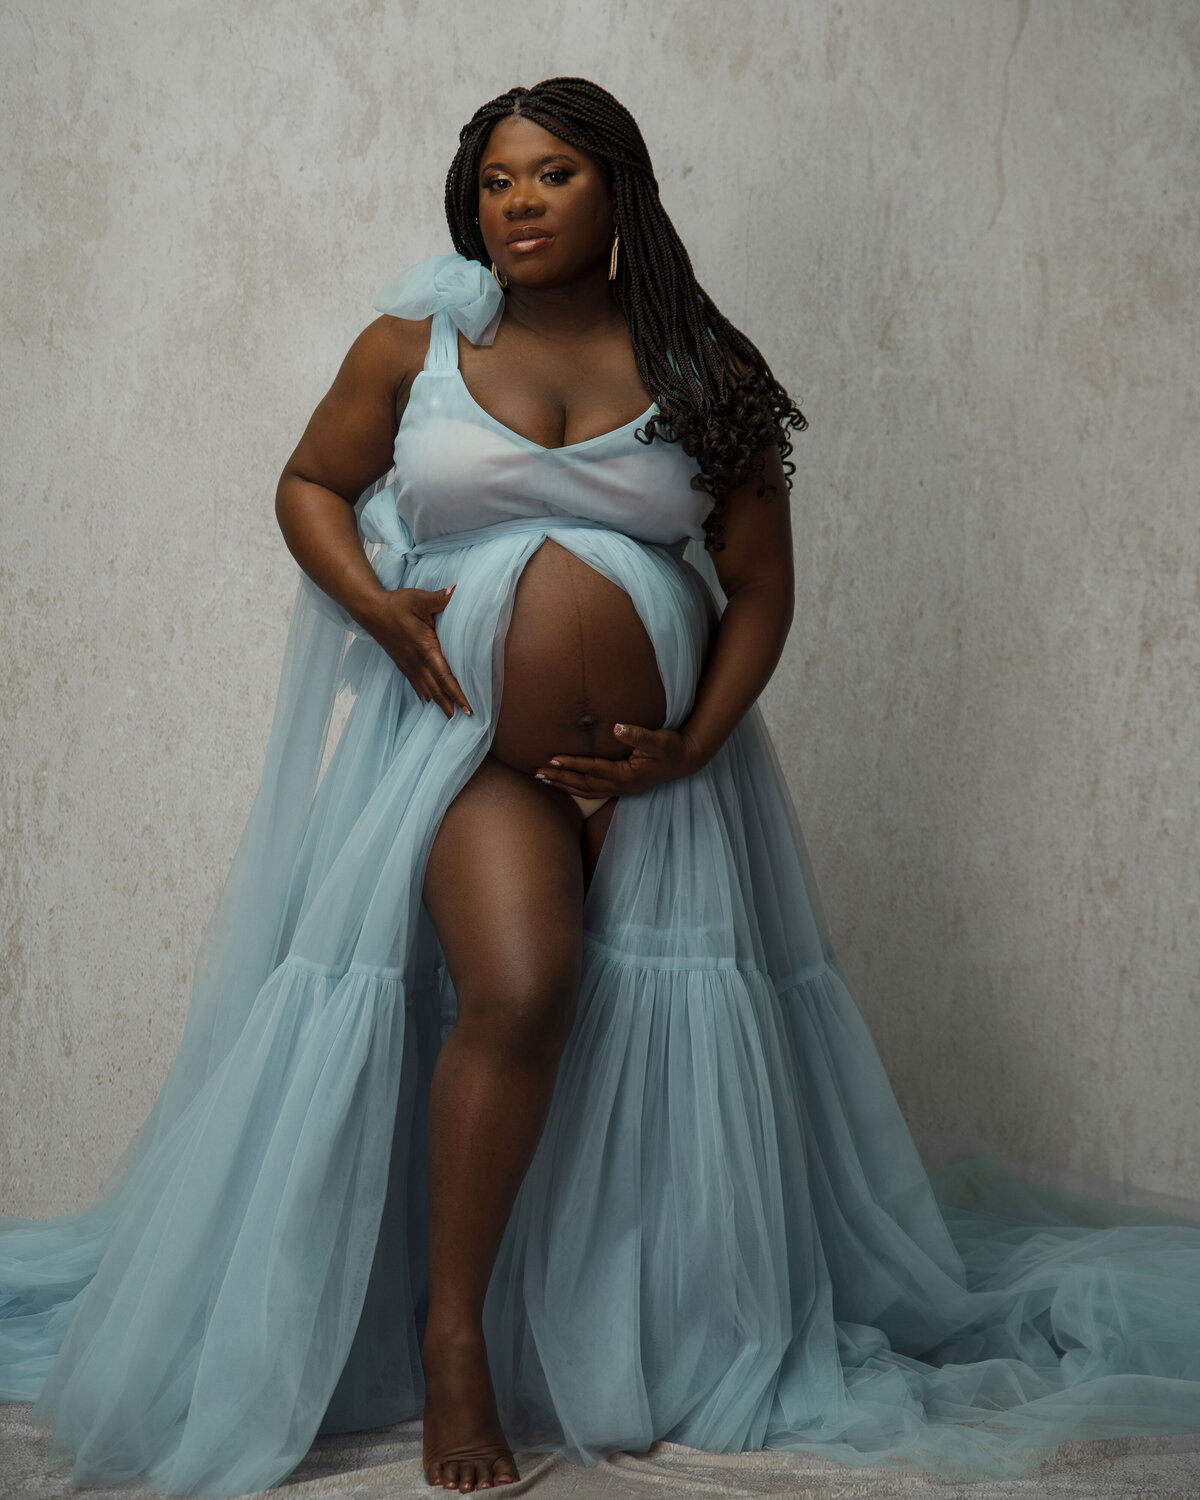 Pregnant woman in light blue long maternity dress showing tummy